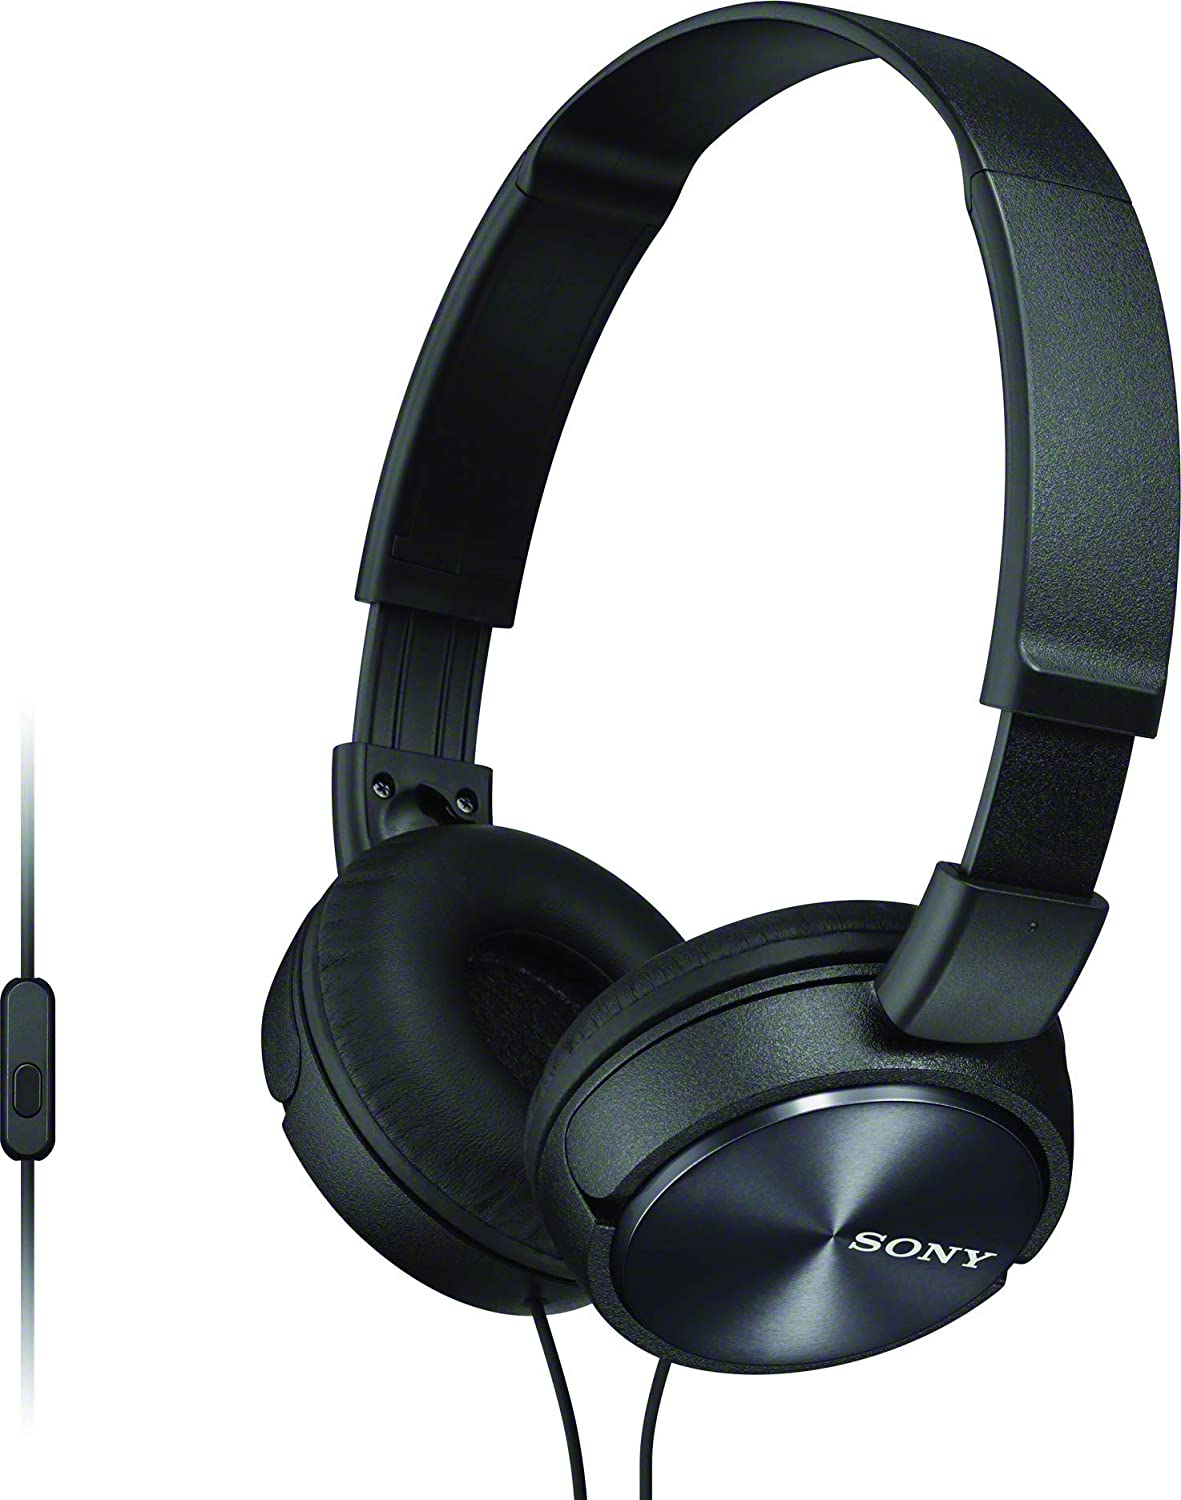 Sony MDR-ZX310AP Extra Bass Wired On-Ear Headphones with Mic - Black (New)